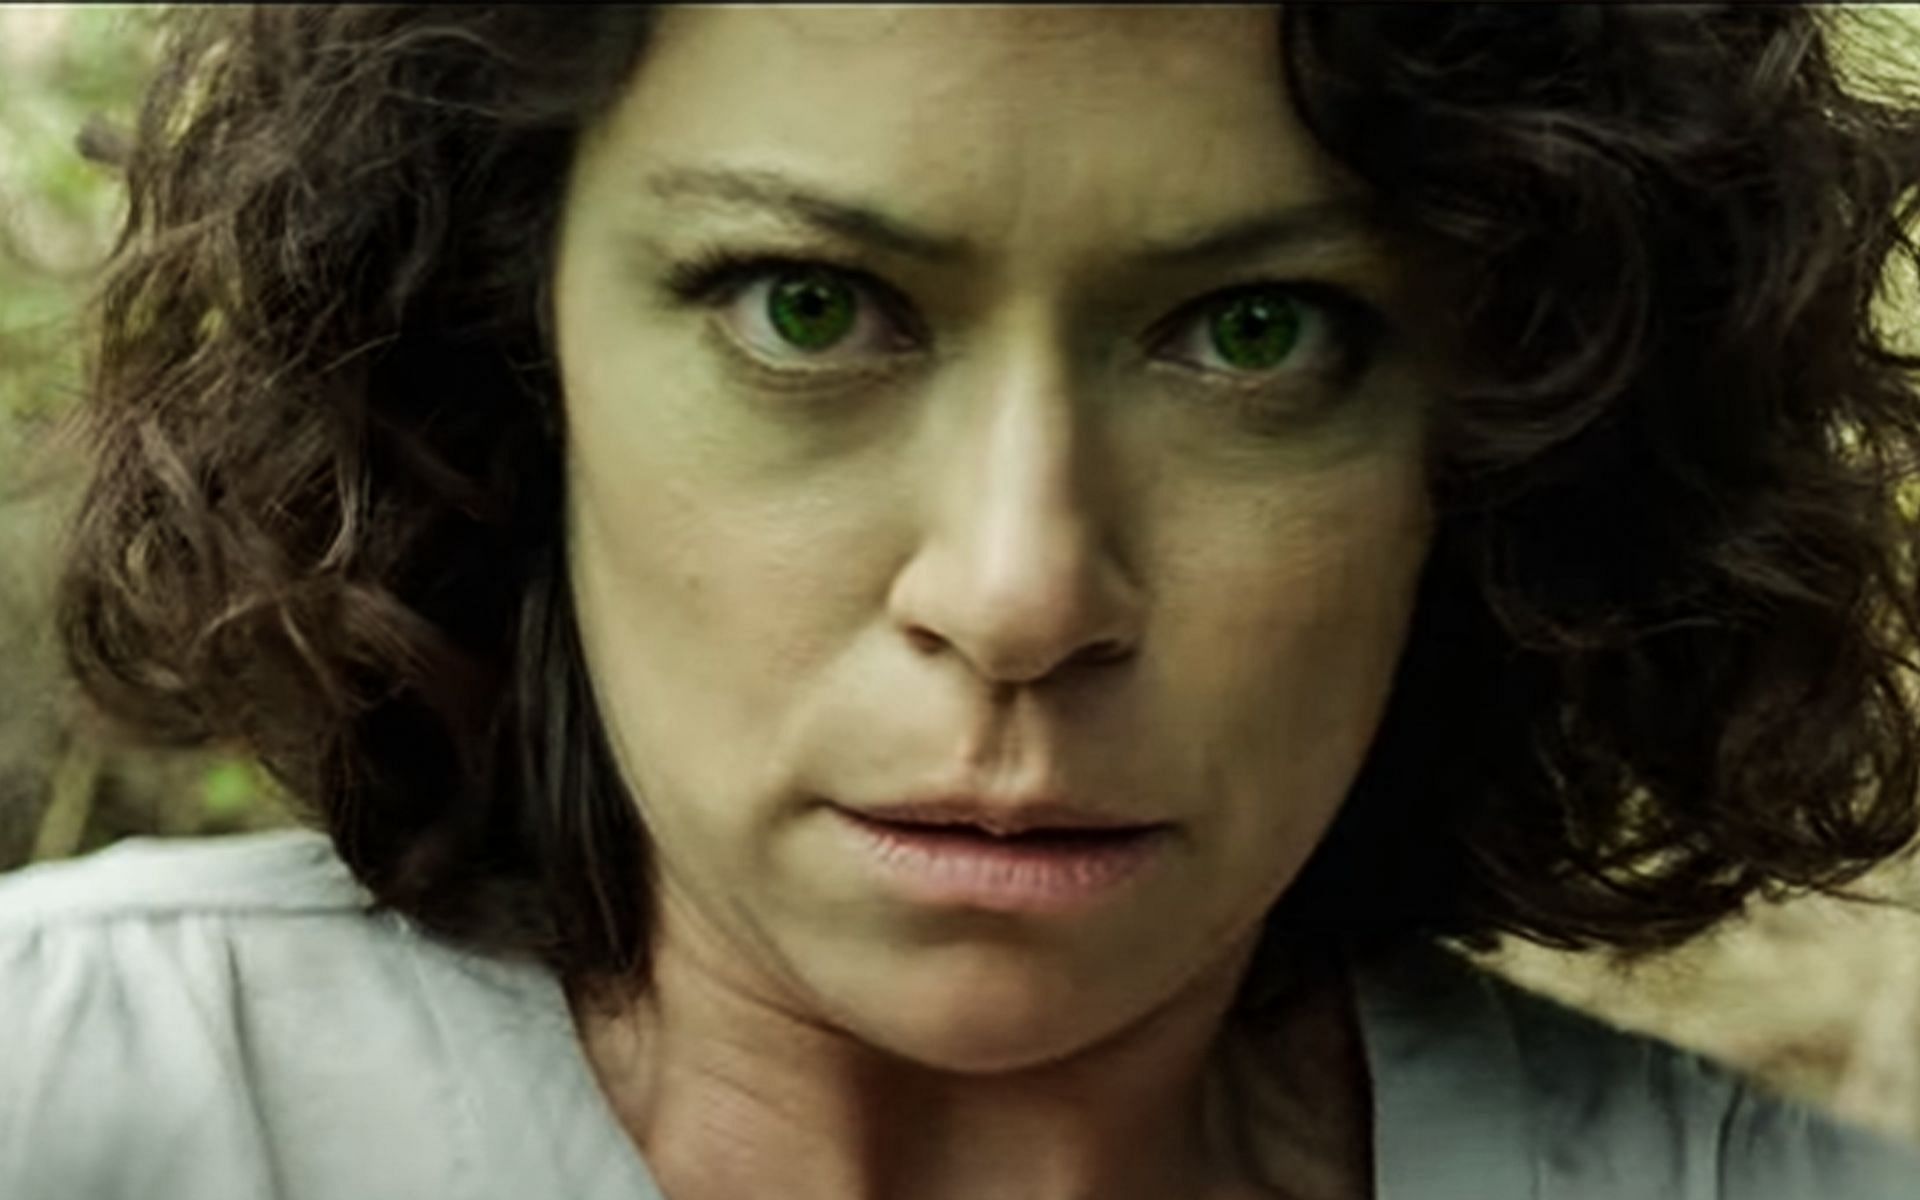 She-Hulk: Attorney at Law Review: Tatiana Maslany Leads a Charming and  Thoughtful Series